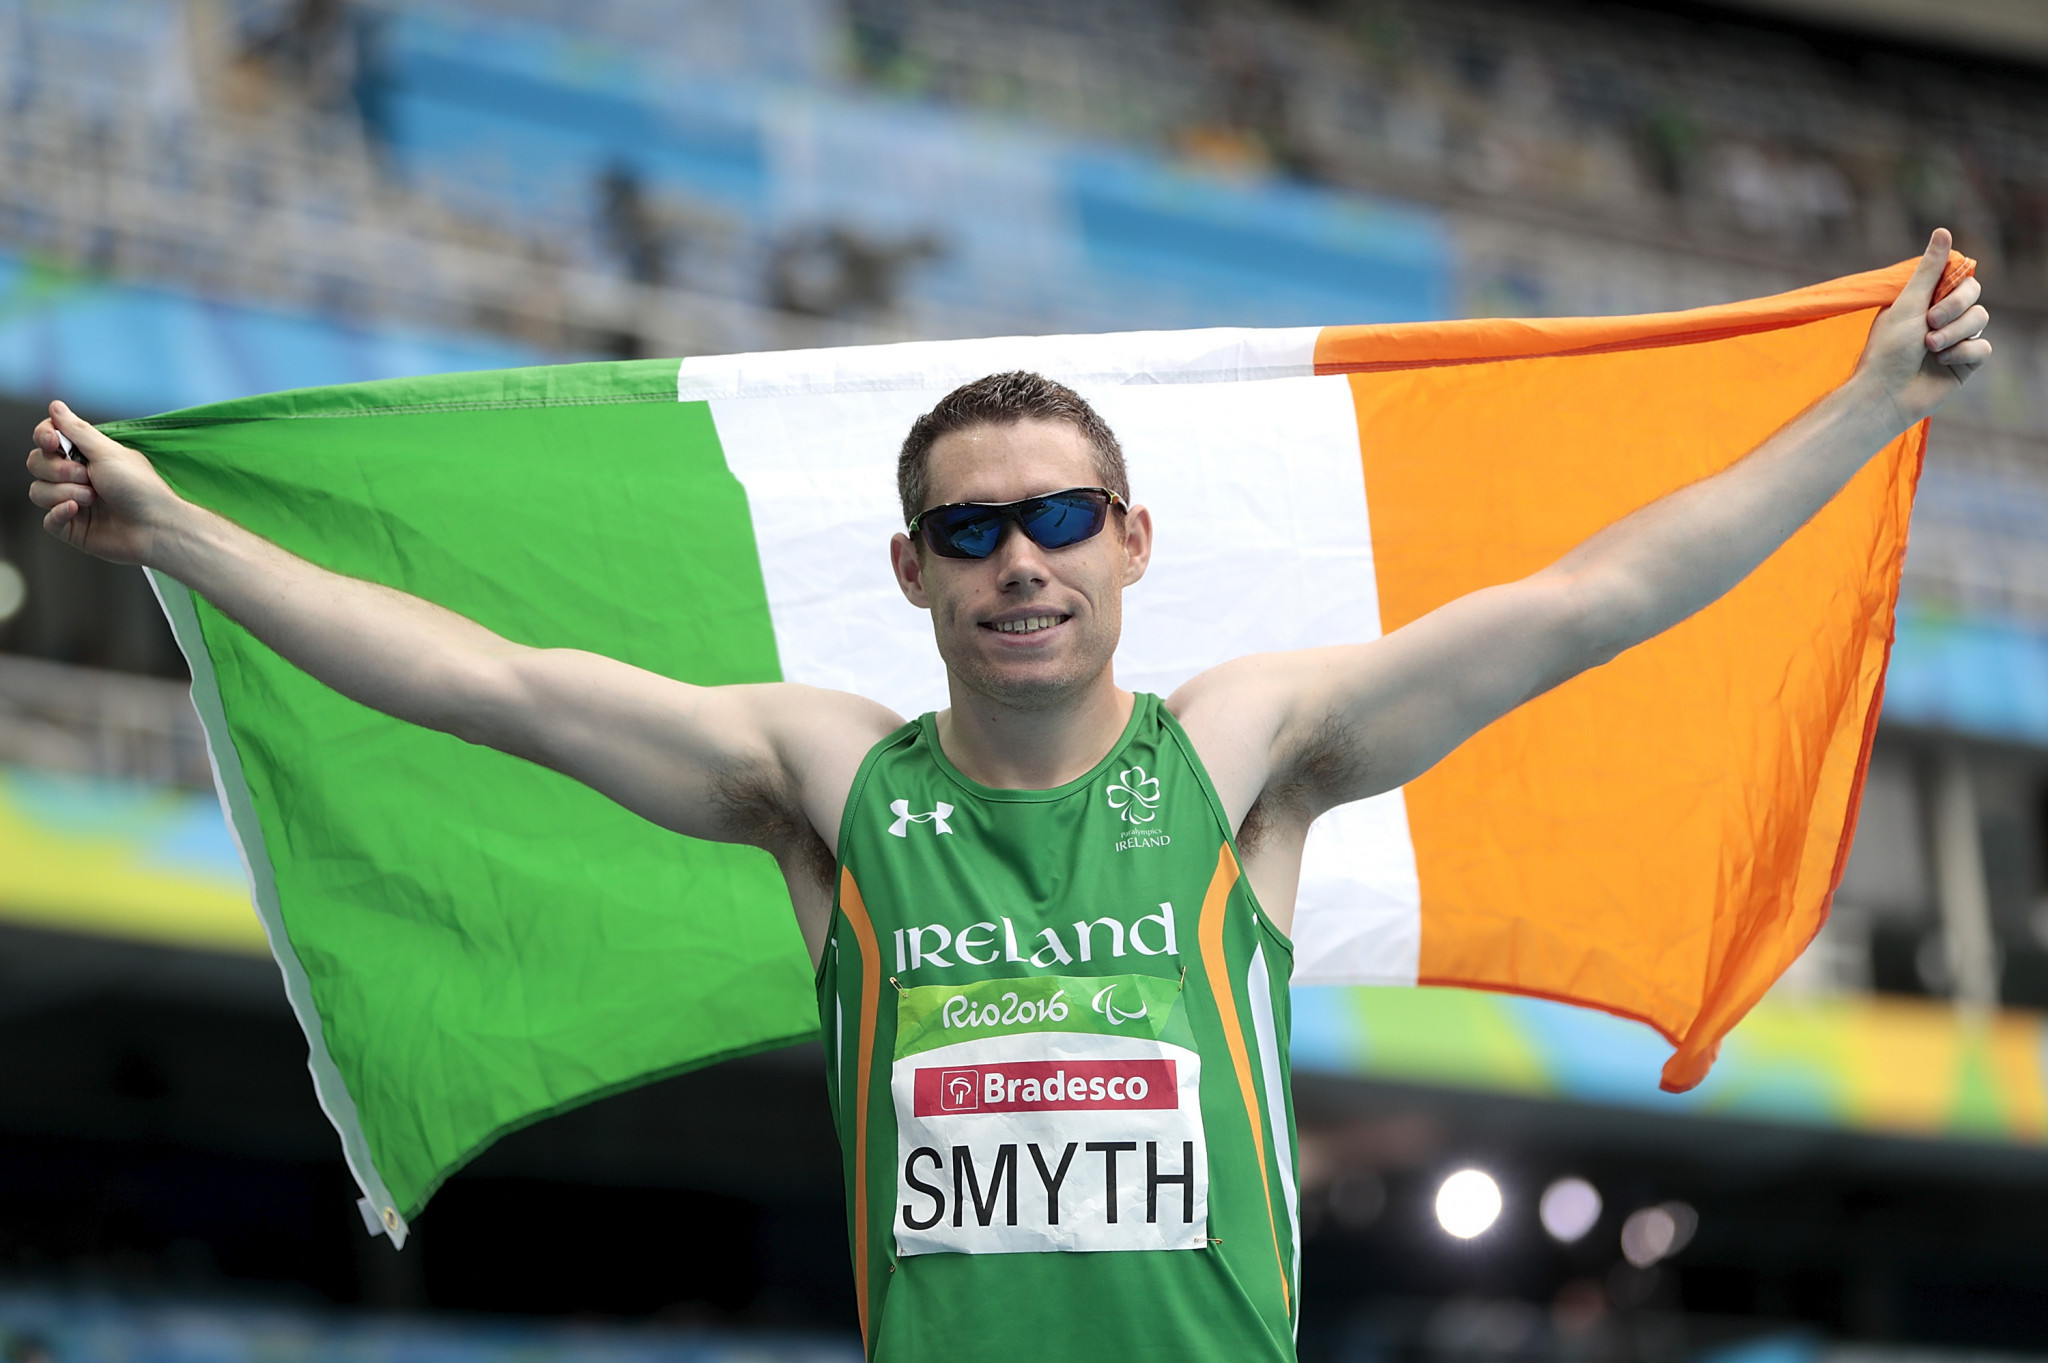 Denis Toomey served as Ireland's Chef de Mission at the Rio 2016 Paralympic Games, where sprinter Jason Smyth won one of the country's four gold medals ©Getty Images